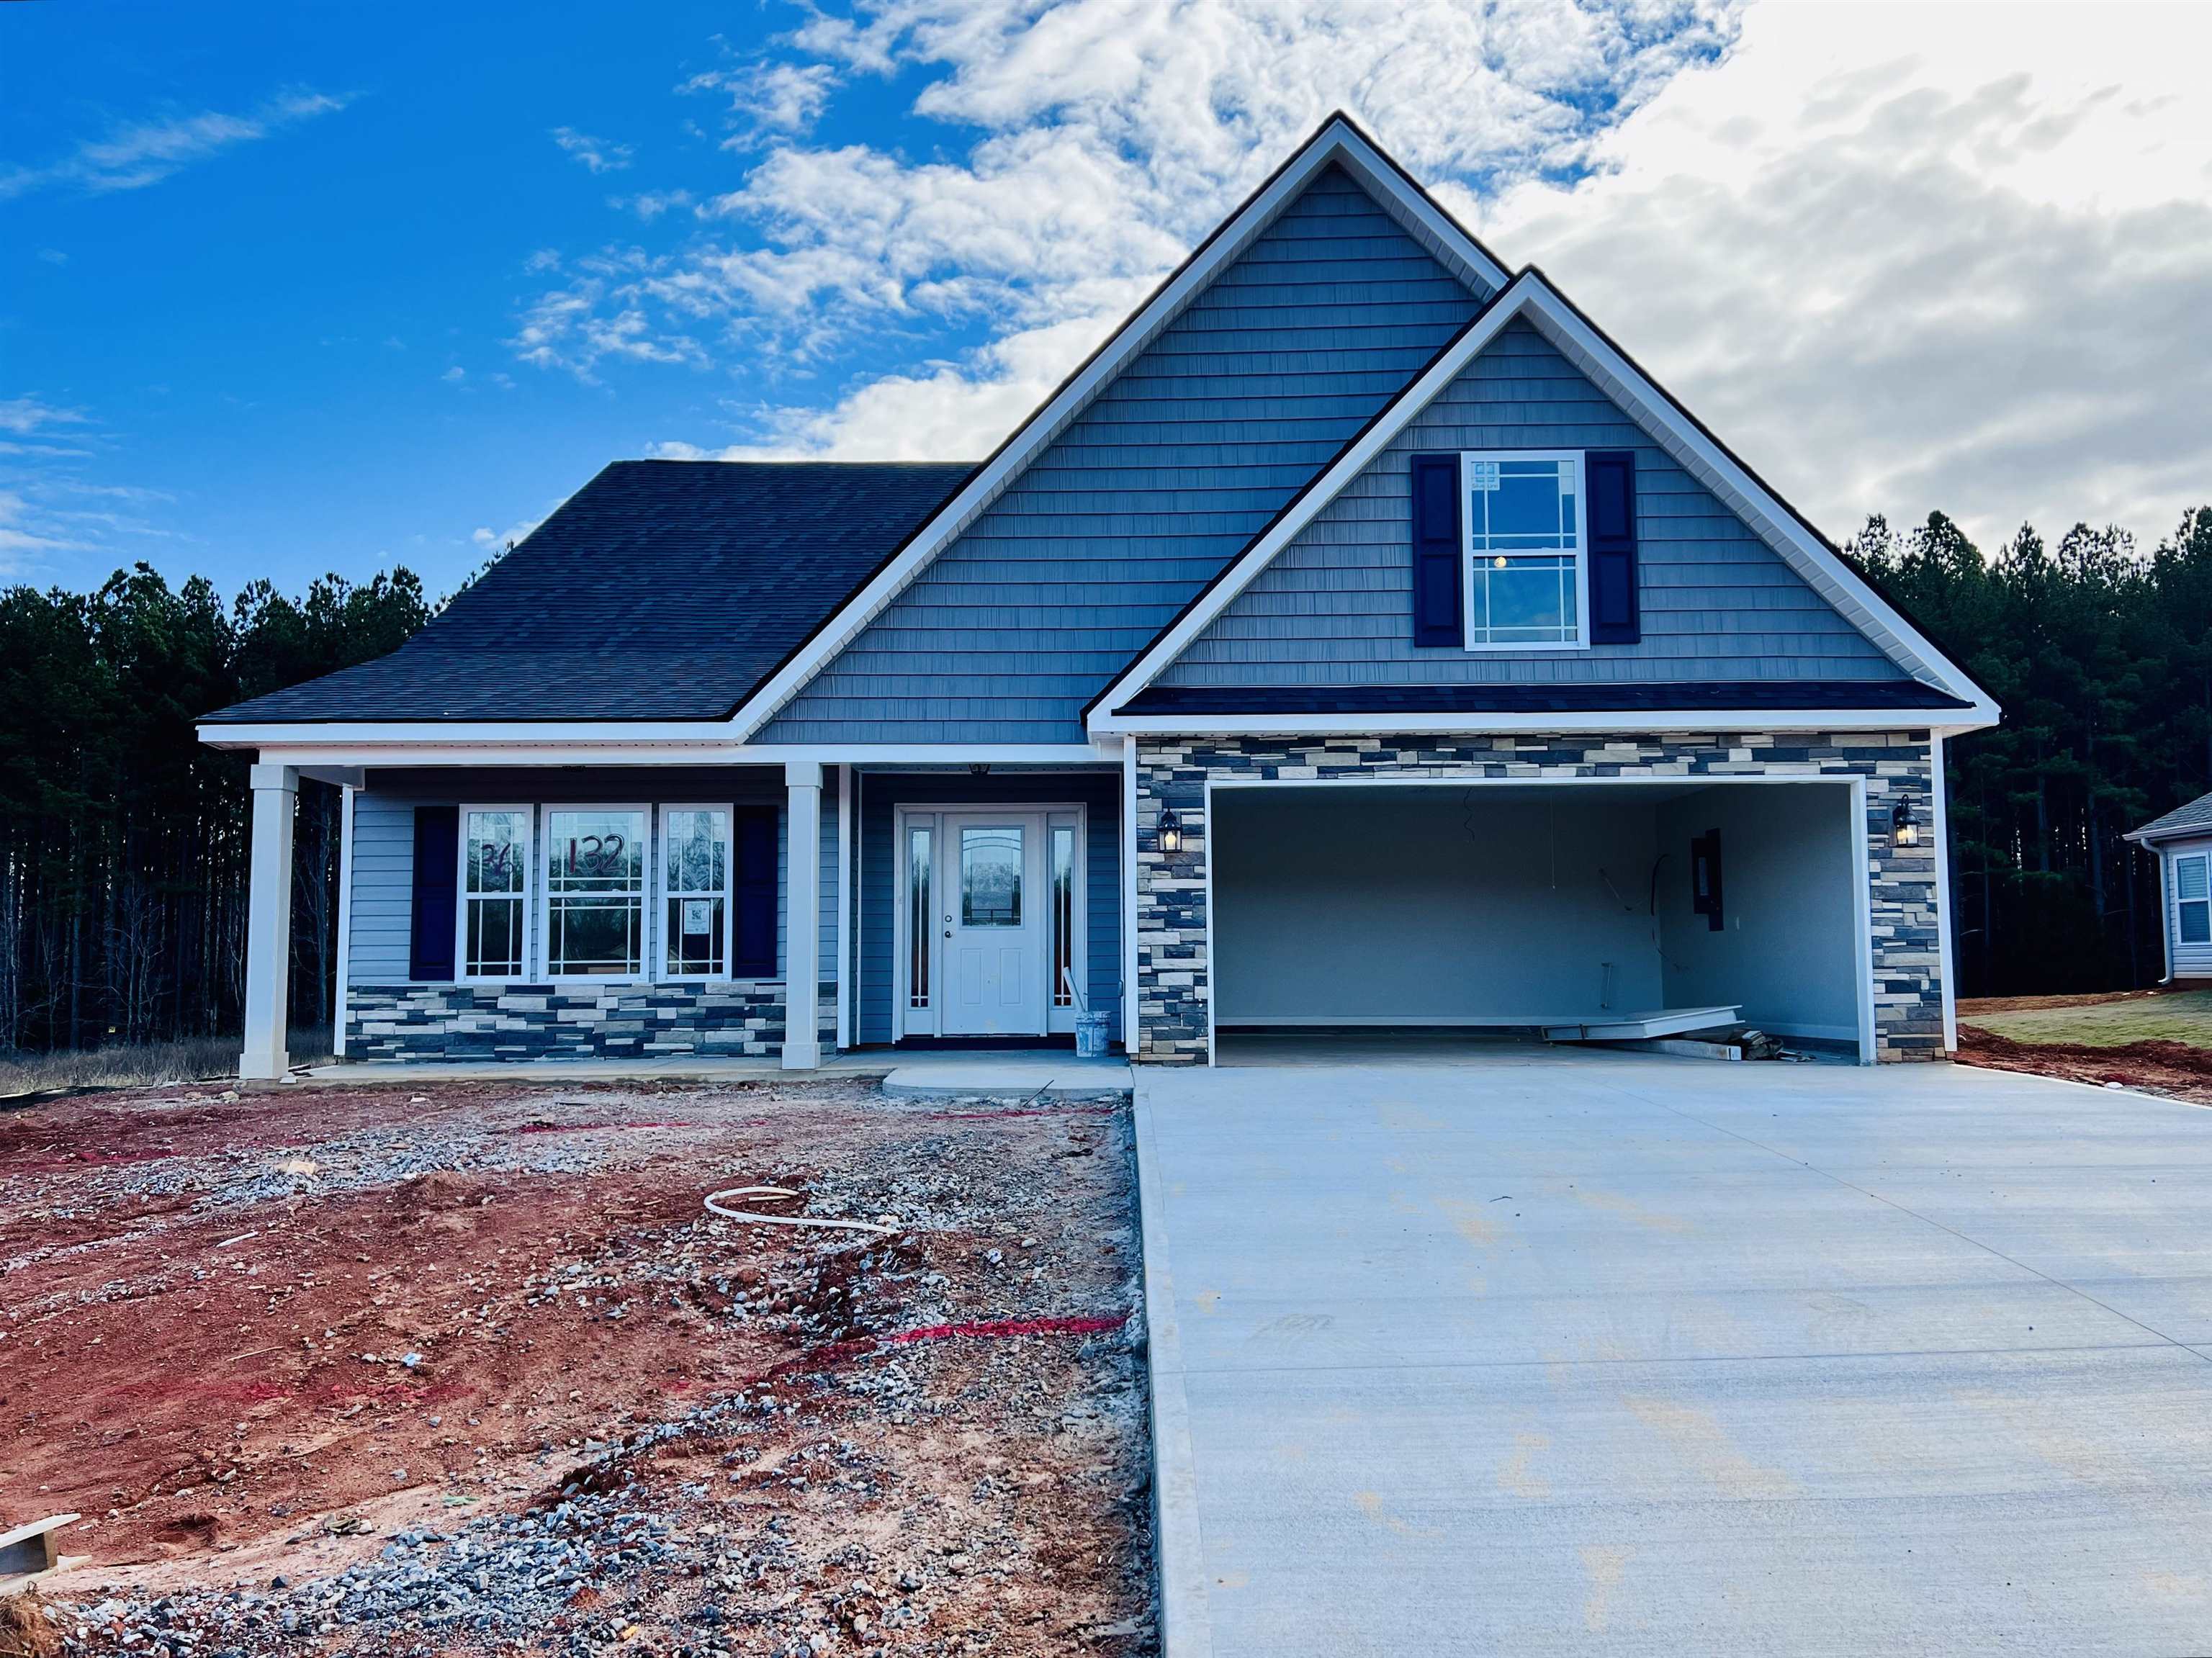 Preferred Lender/Attorney Closing Costs Incentive Offered!  Welcome to Double Creek! The Addington plan offers a beautiful, modern layout. Spacious kitchen and formal dining. Home complete with the trademark chair rail, crown molding, and rope lighting.